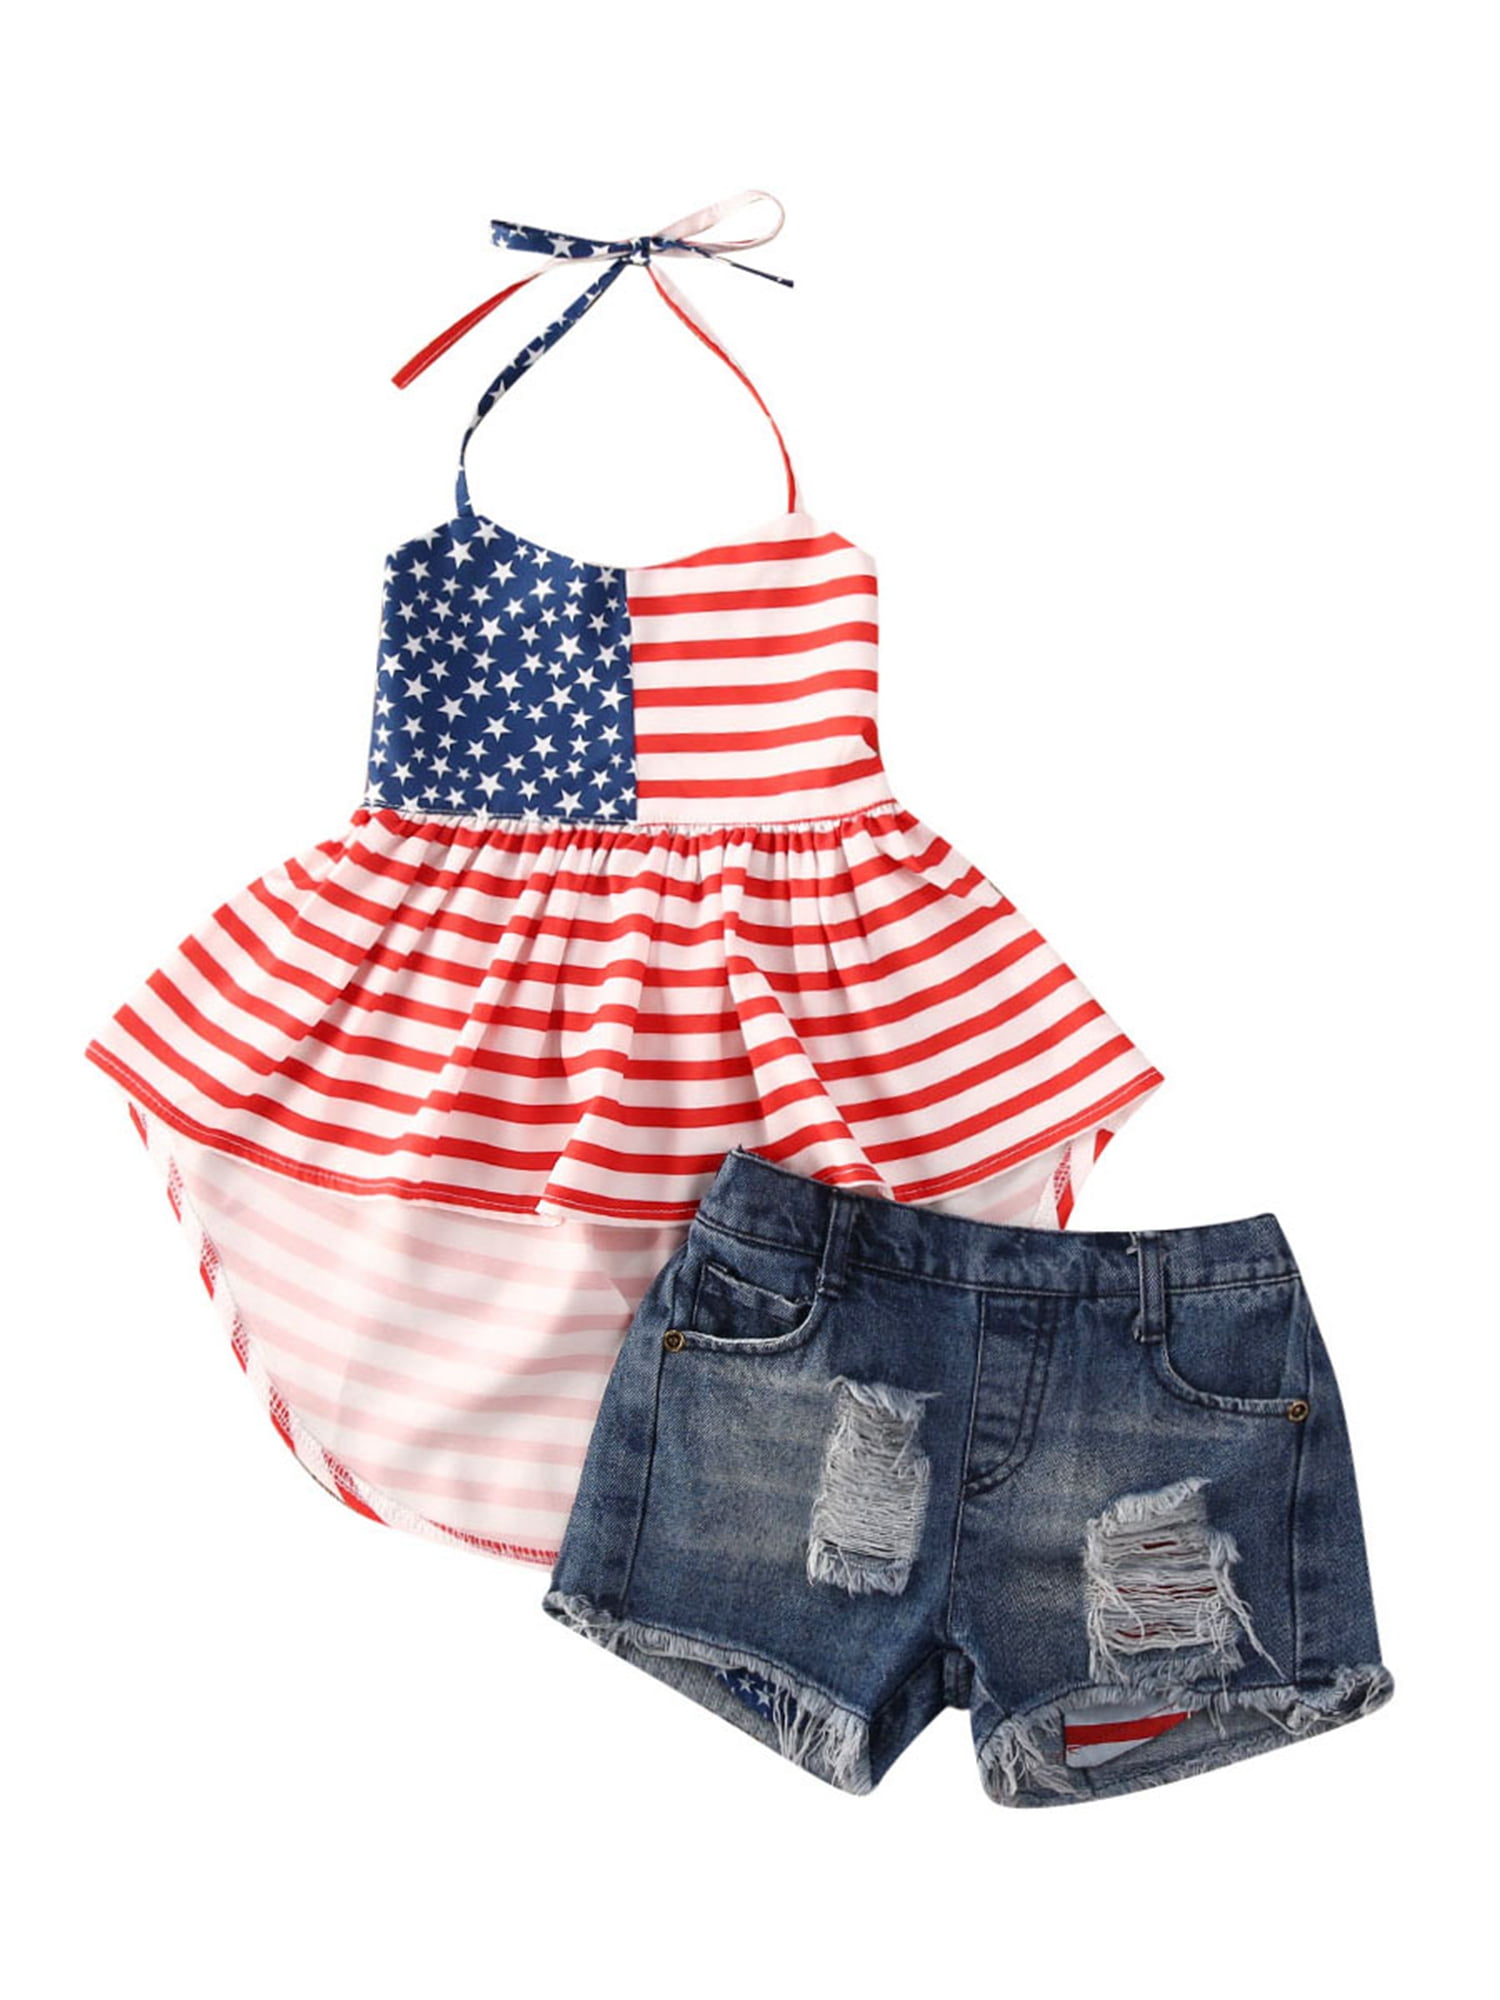 2Pcs Toddler Baby Girl Outfits Sunflower Vest Tops+Jeans Shorts Kids Clothes set 